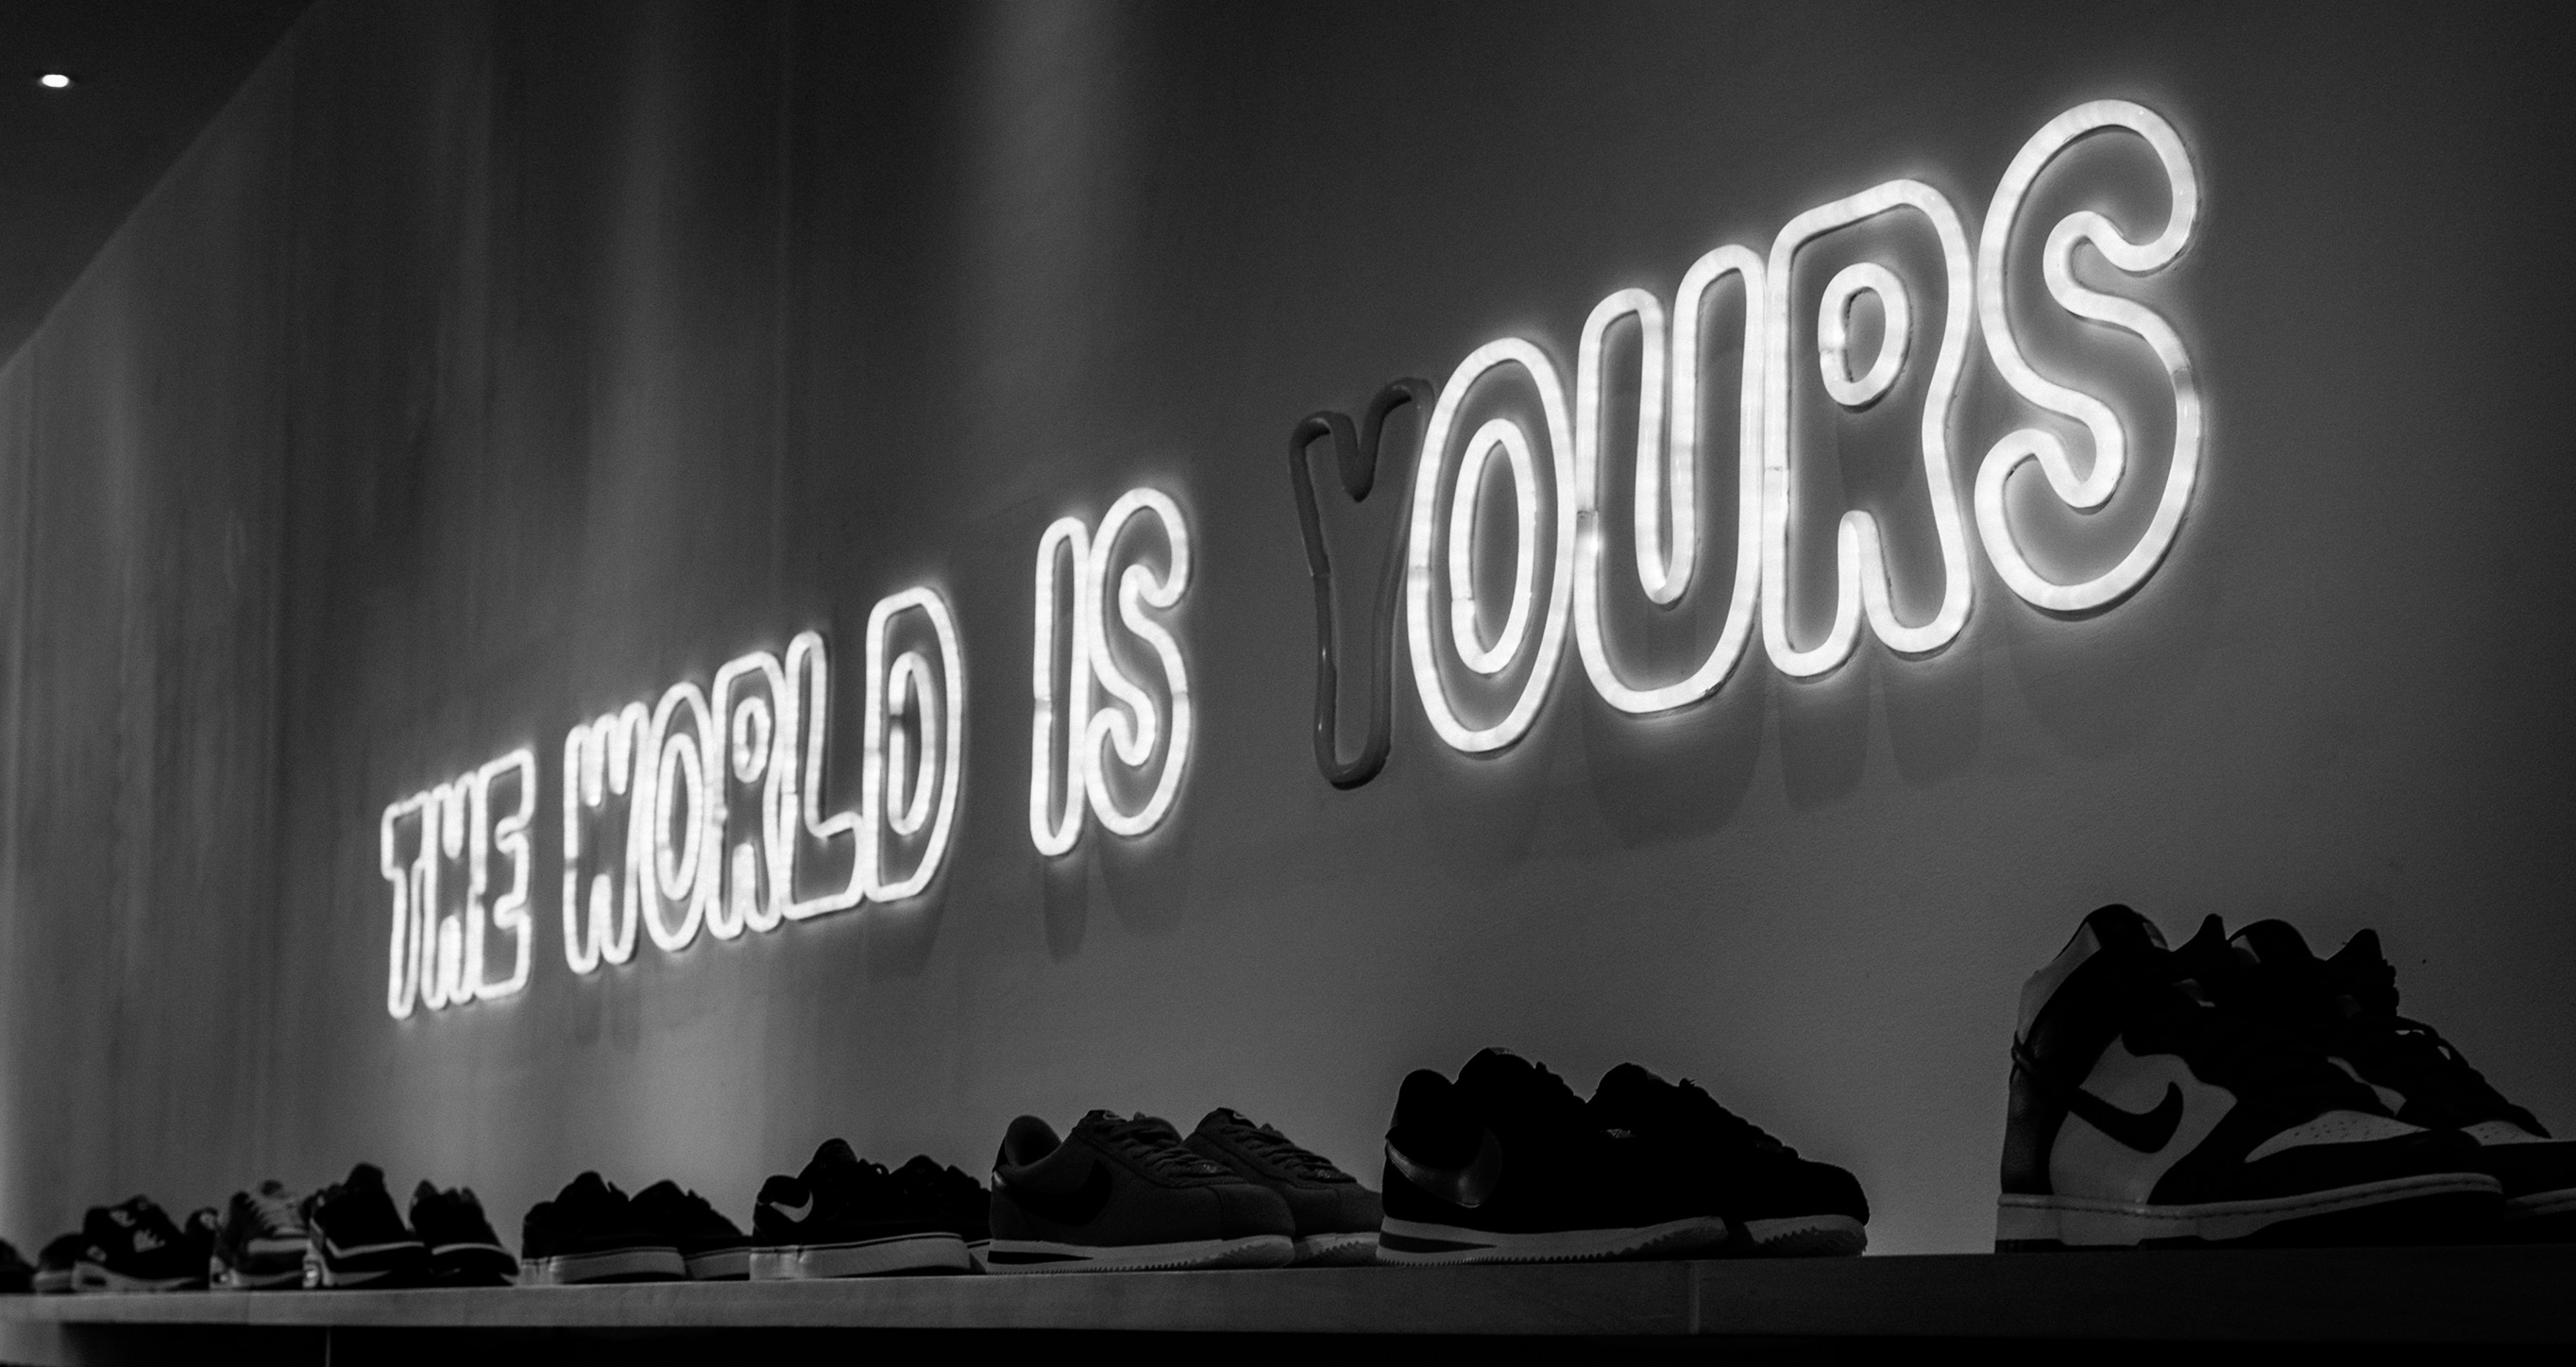 Brand purpose - The World Is Ours